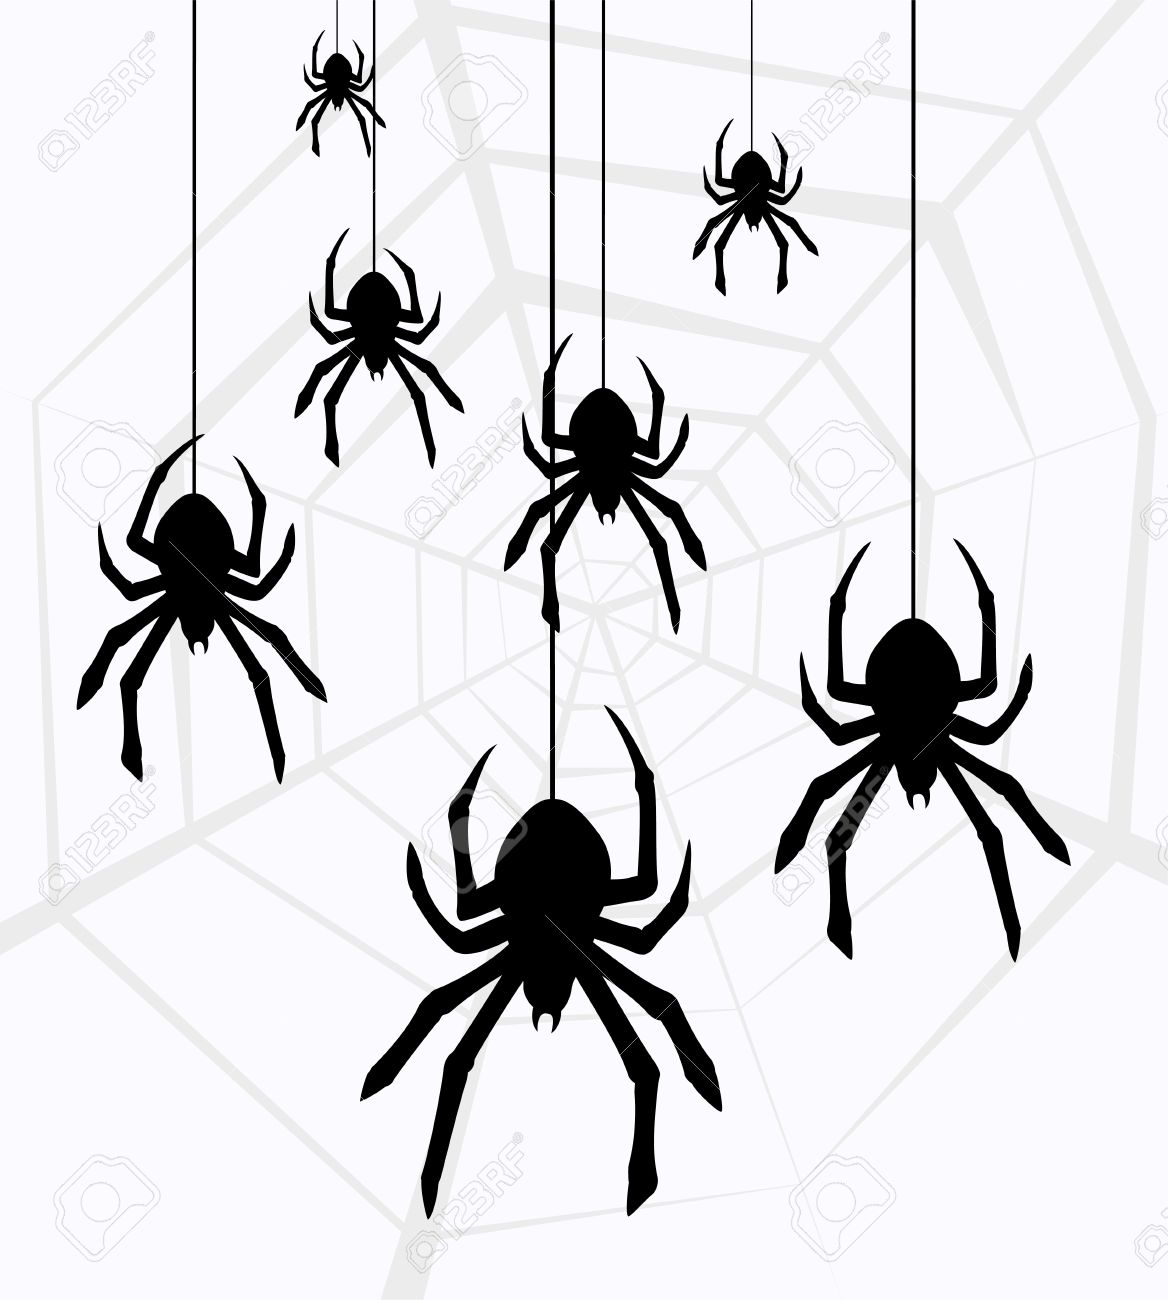 Spiders clipart - ClipartFest